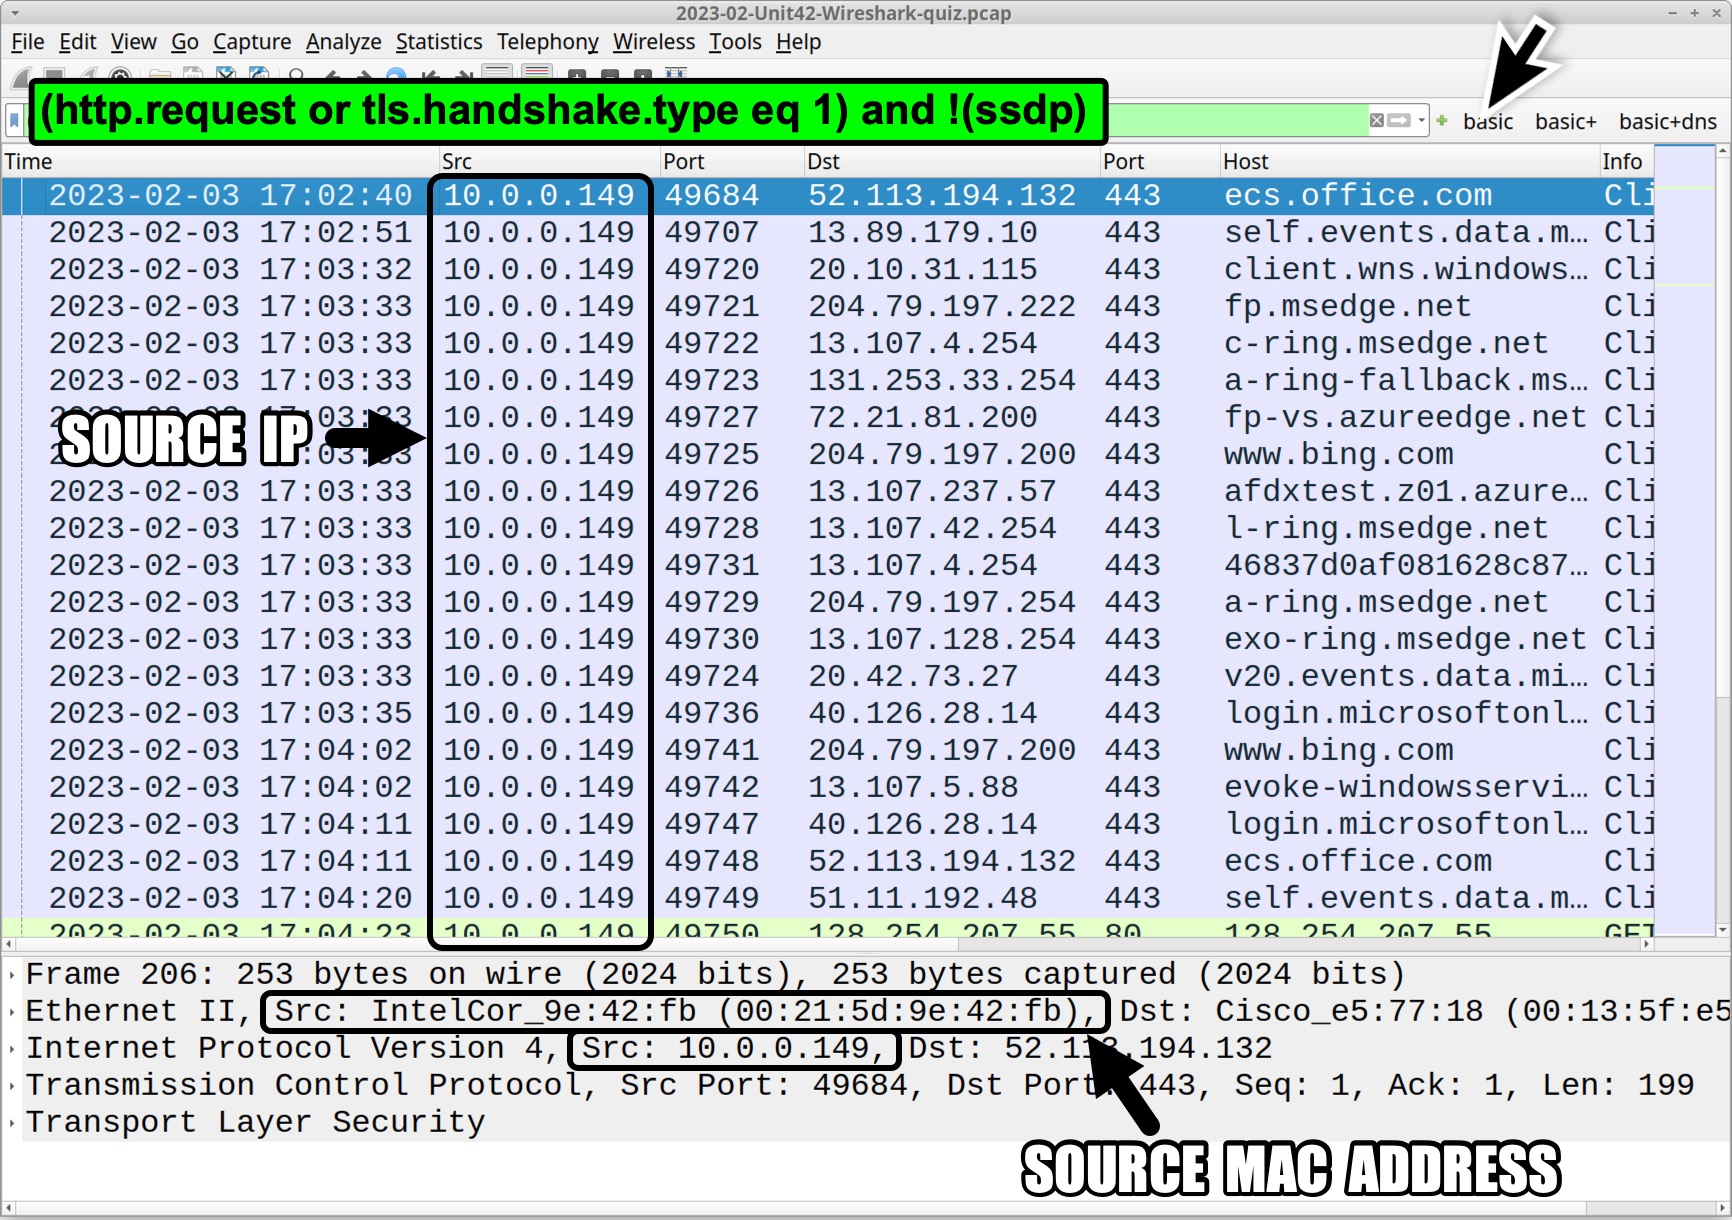 Image 1 is a screenshot of Wireshark that highlights the source IP column (Src), the source MAC address when filtering the web traffic. 